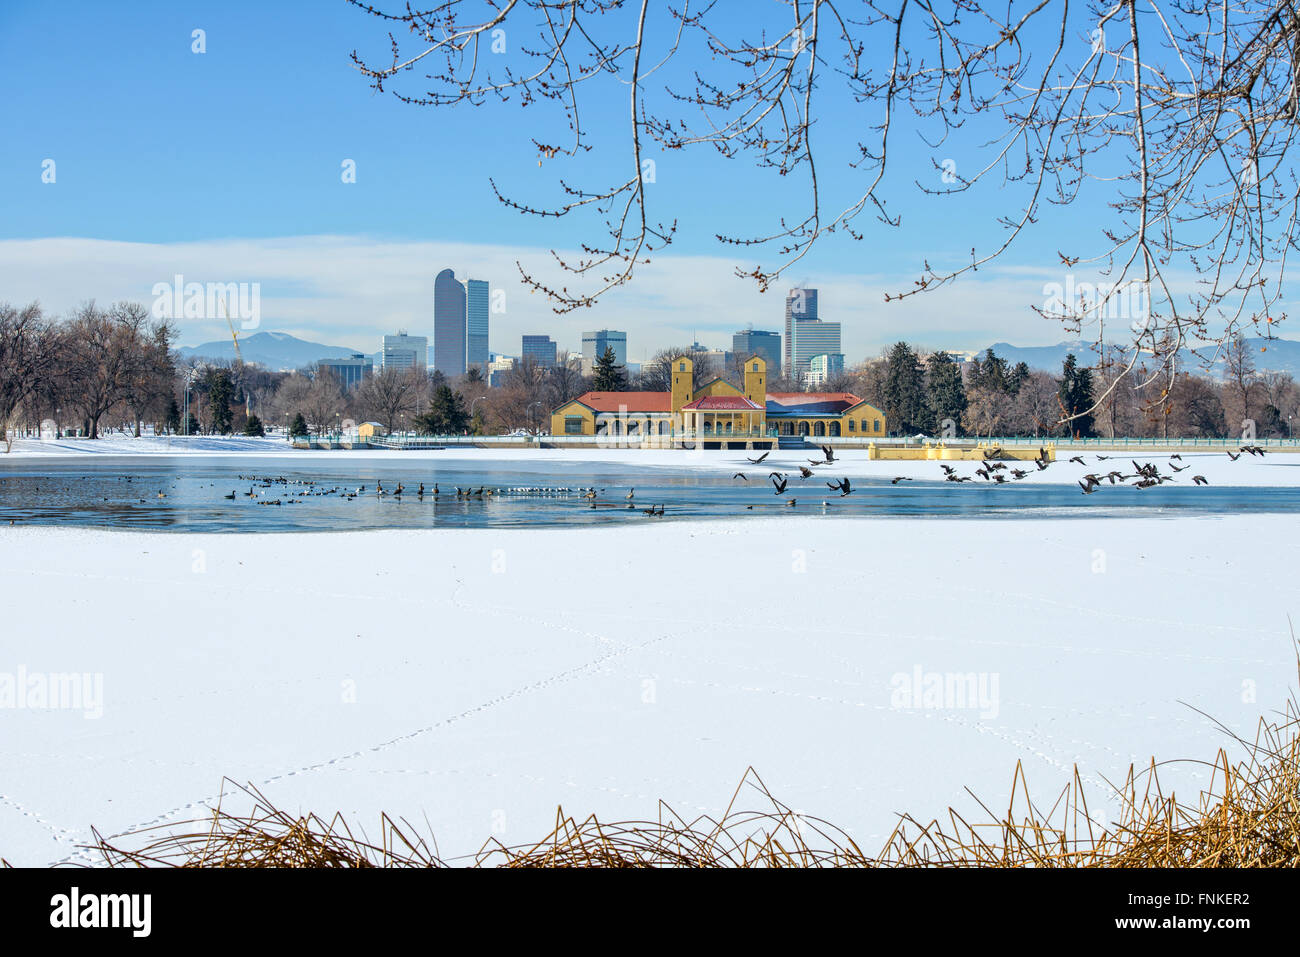 Winter Lake At Downtown Denver - A winter view of frozen lake in a city park at east-side of Downtown Denver, Colorado, USA. Stock Photo